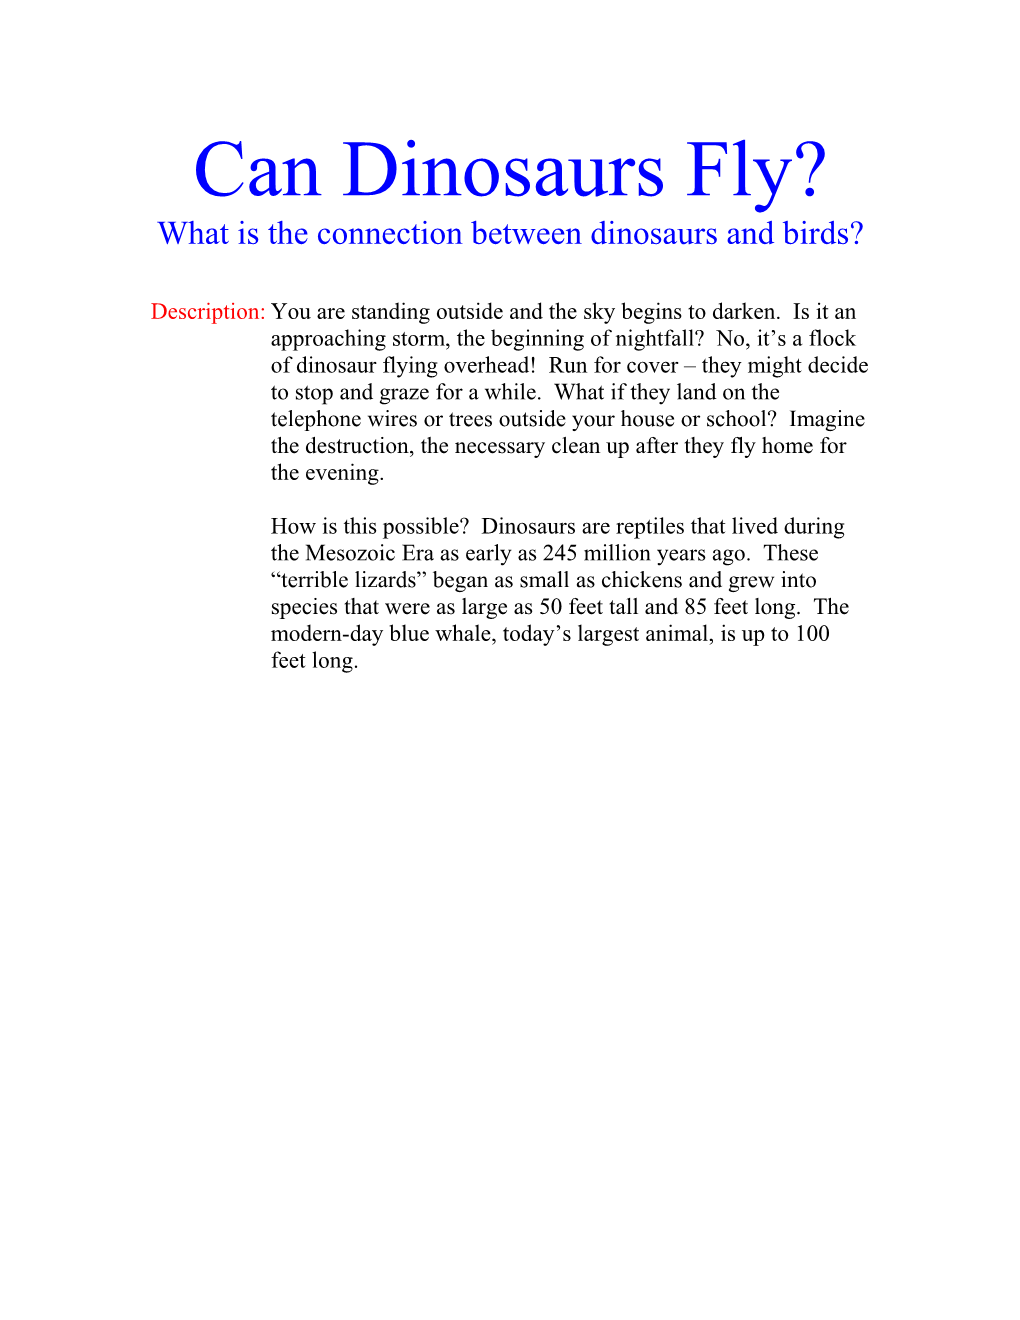 Can Dinosaurs Fly